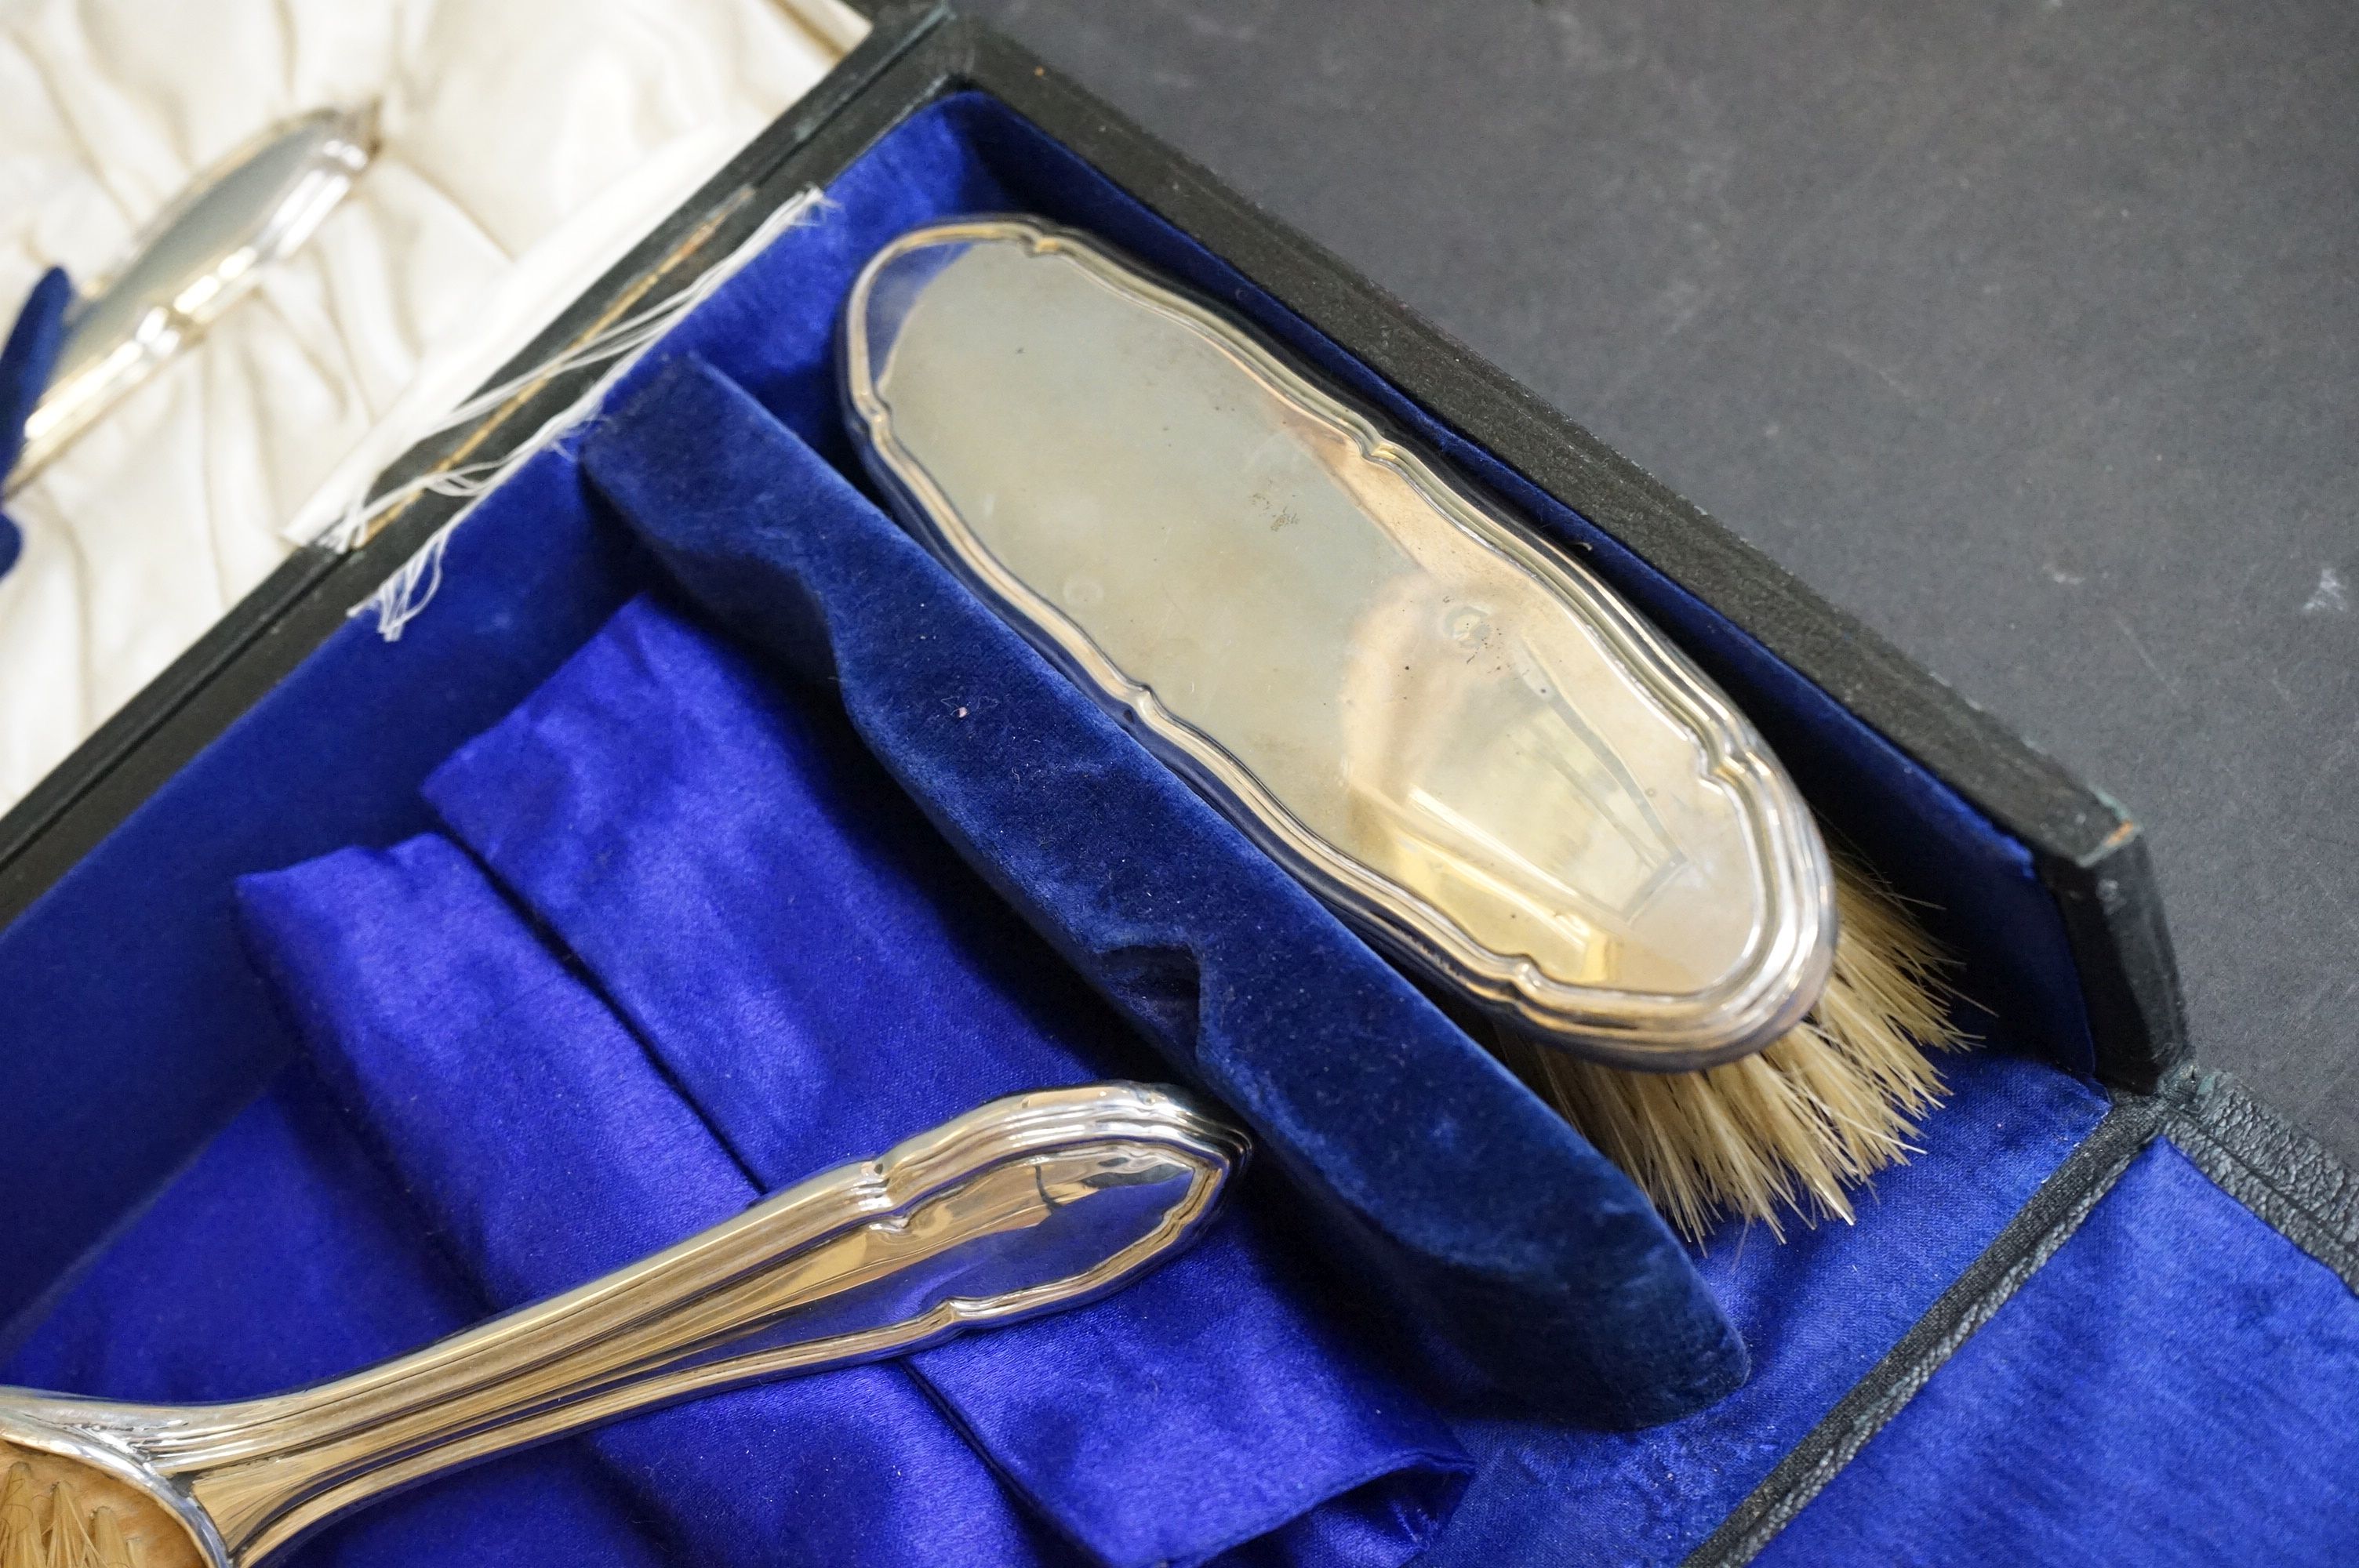 A Gorham Manufacturing Co sterling silver vanity brush & mirror set in original fitted box - Image 6 of 9